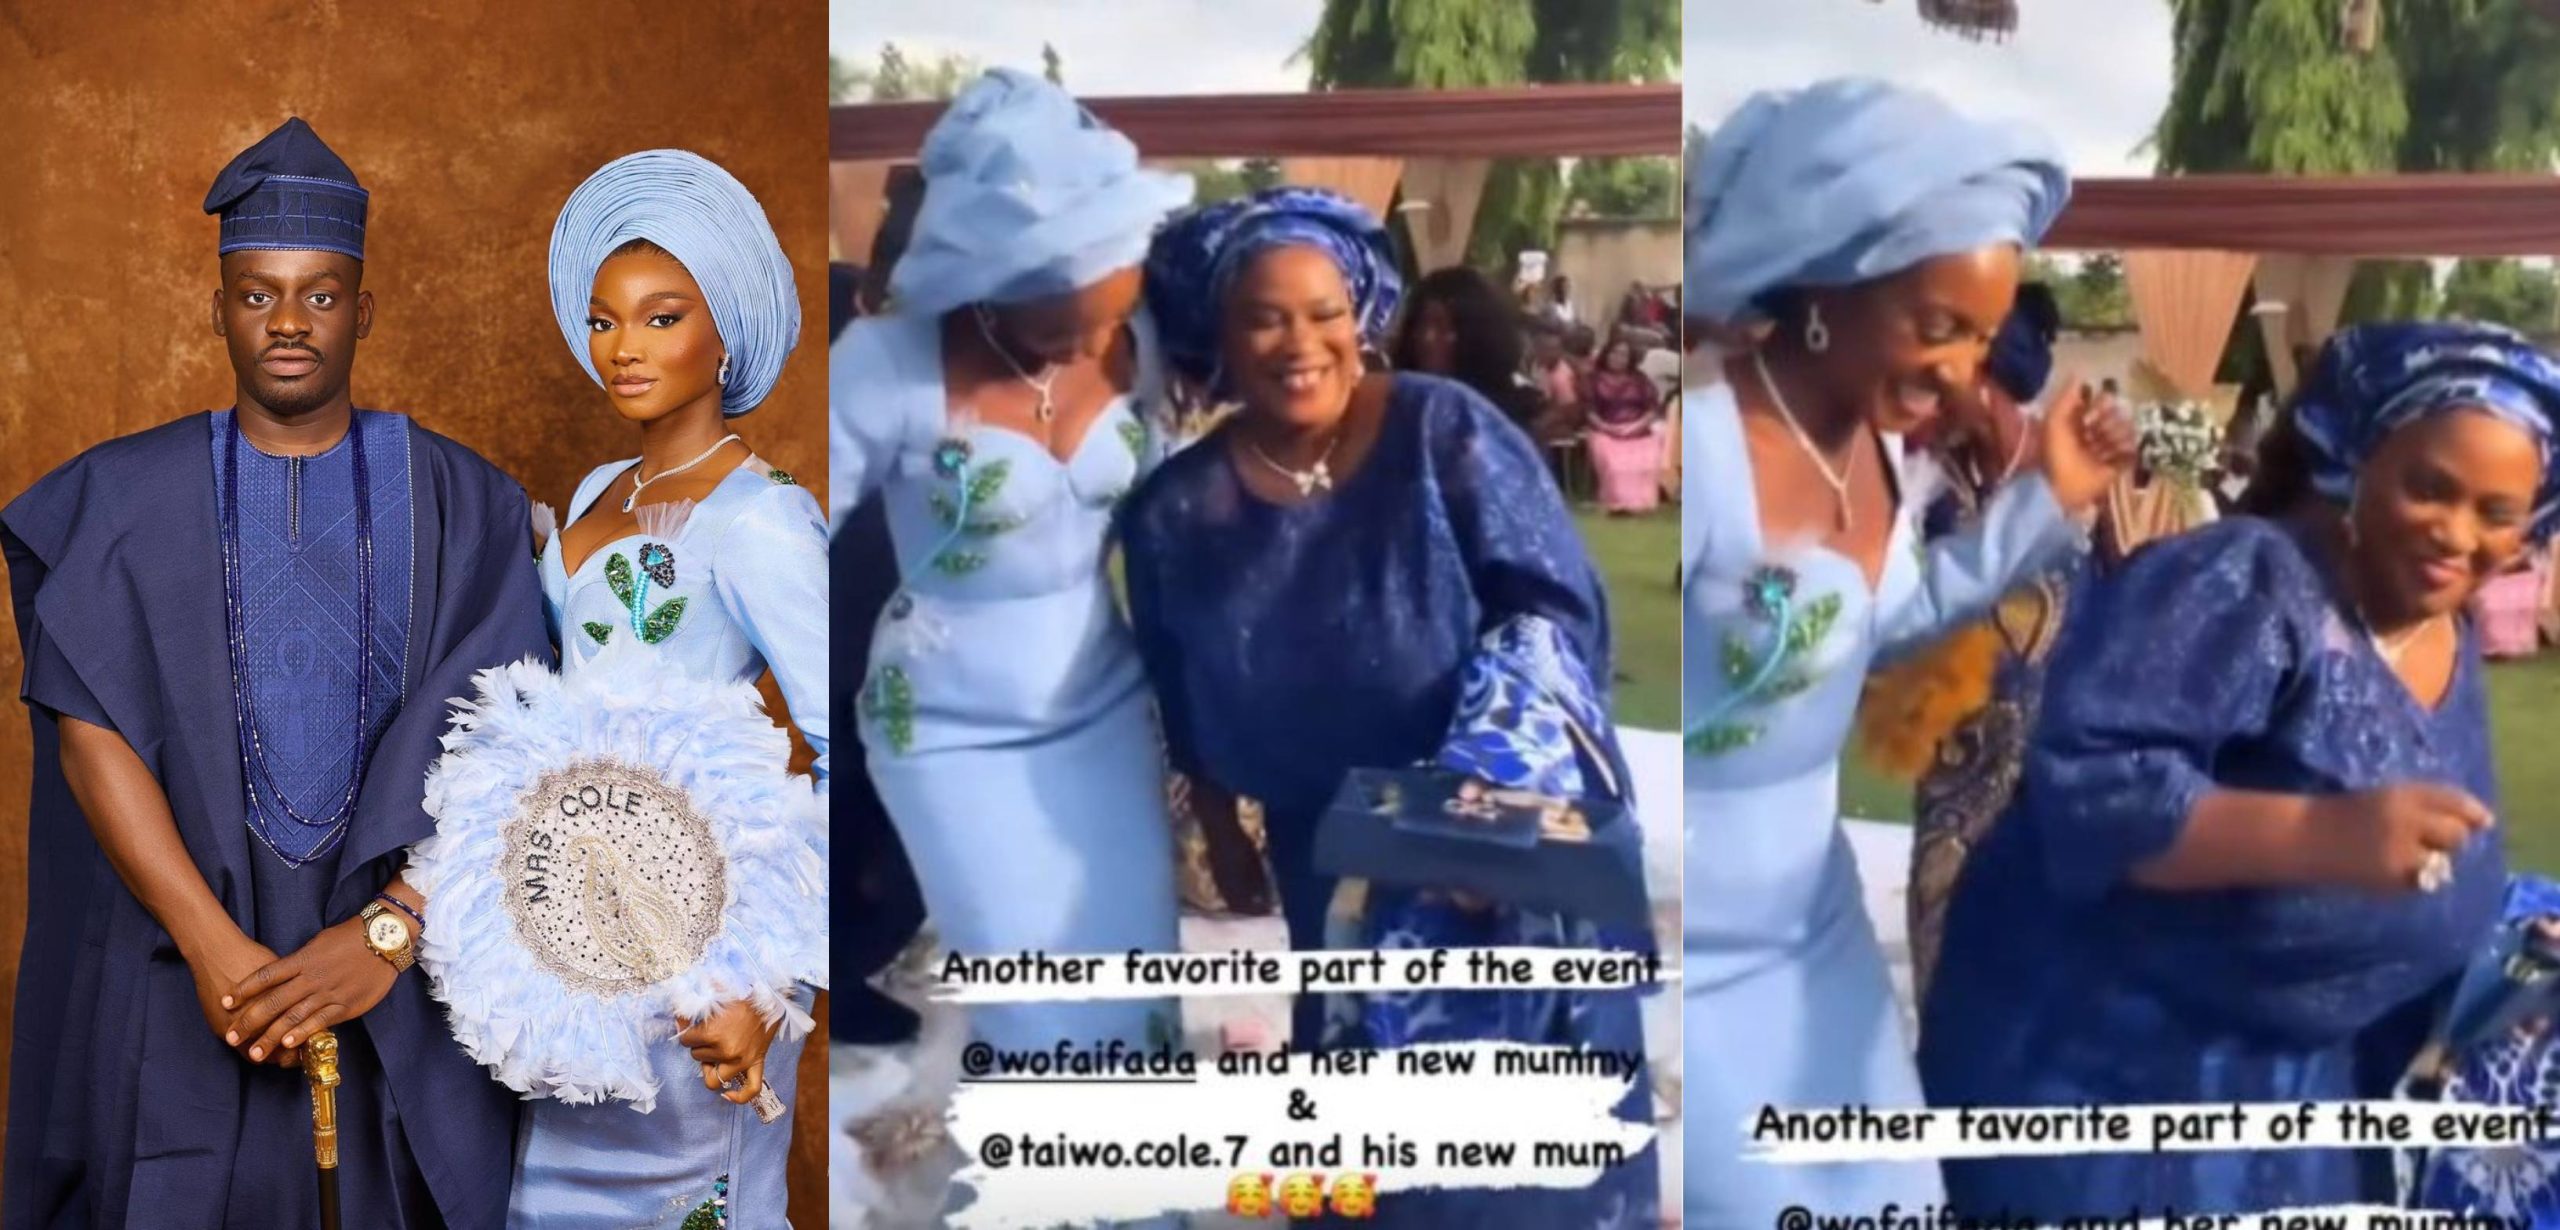 Moment actress Wofai Fada and her mother-in-law dancing together on her wedding surface online